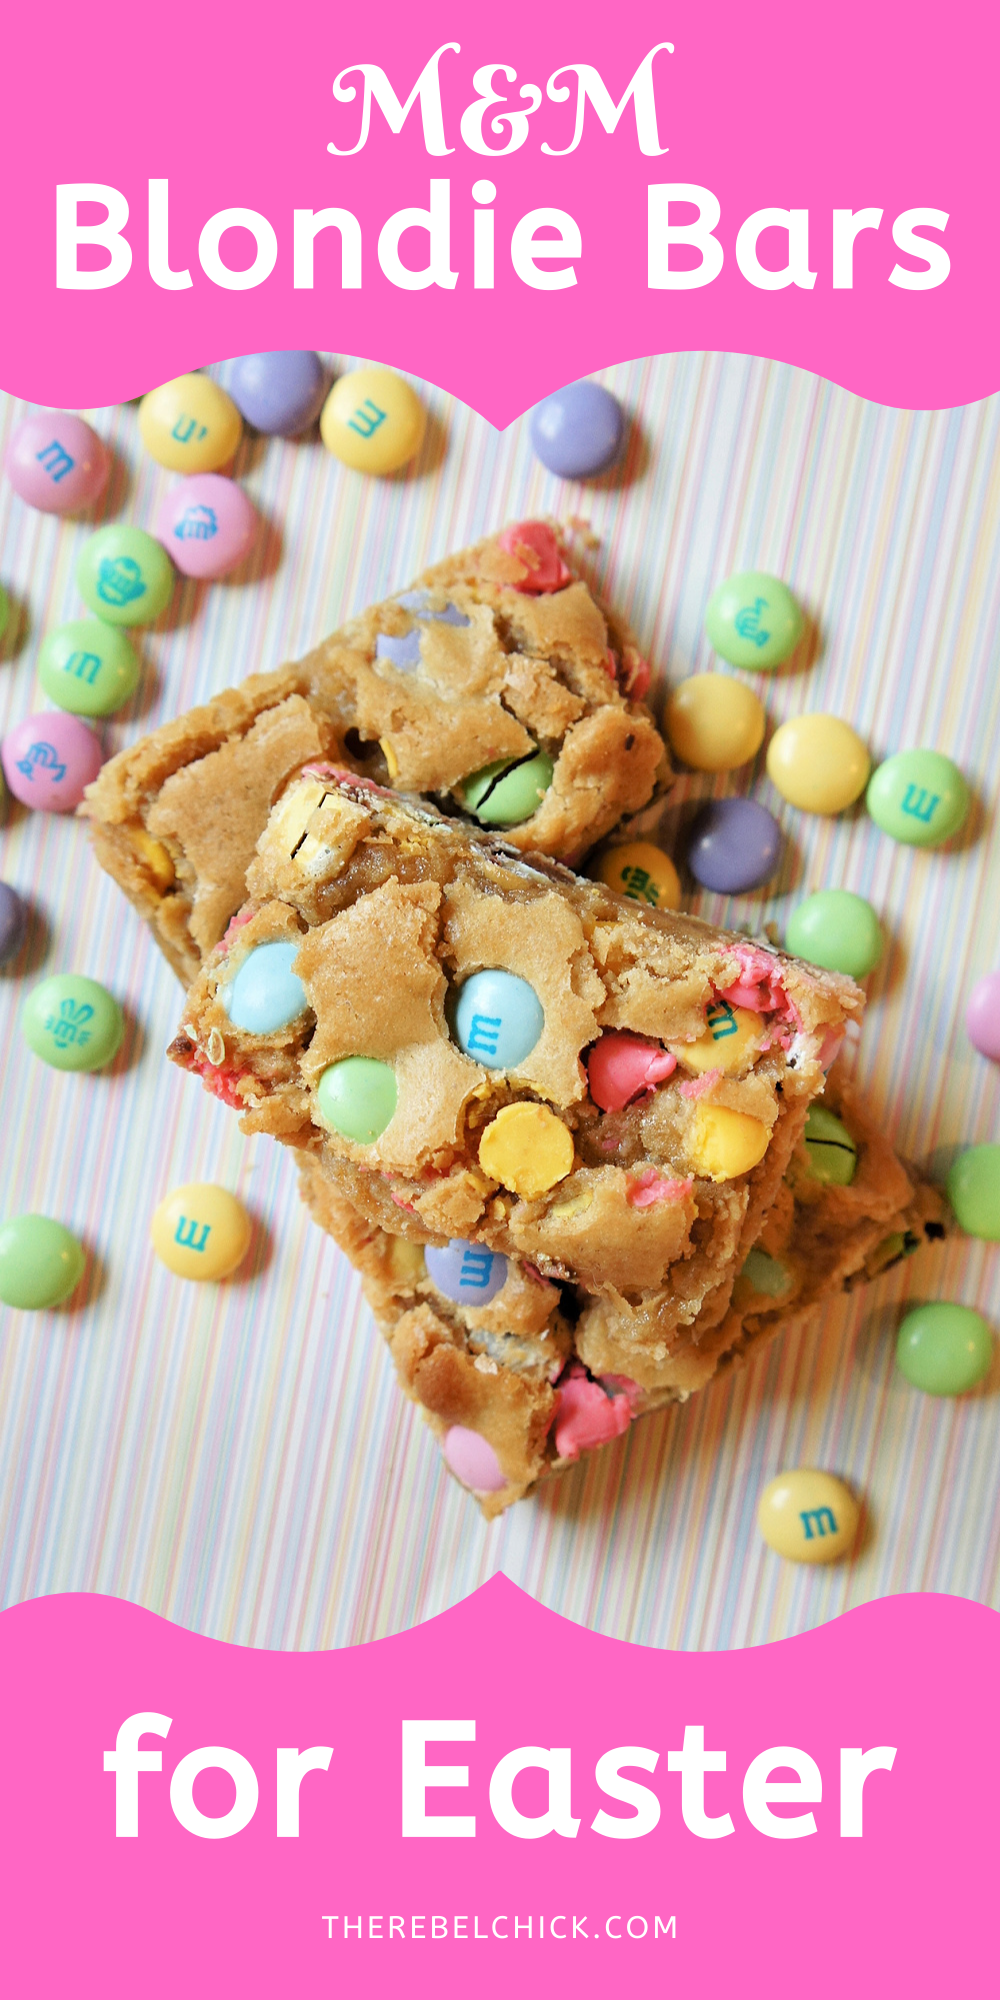 M&M Blondie Bars Recipe for Easter